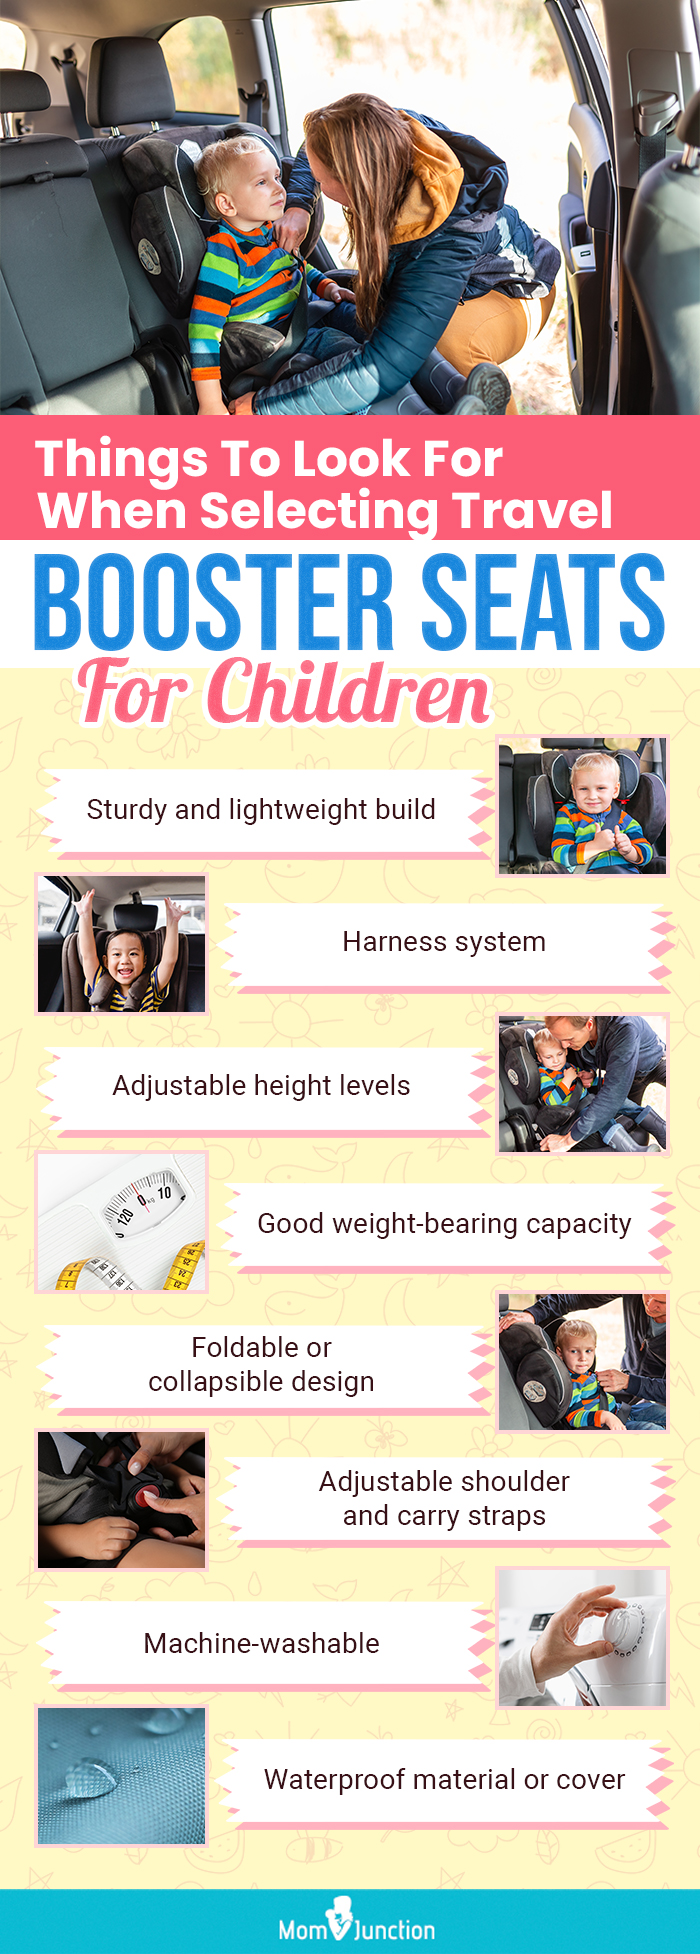 Things To Look For When Selecting A Travel Booster Seats For Children (infographic)